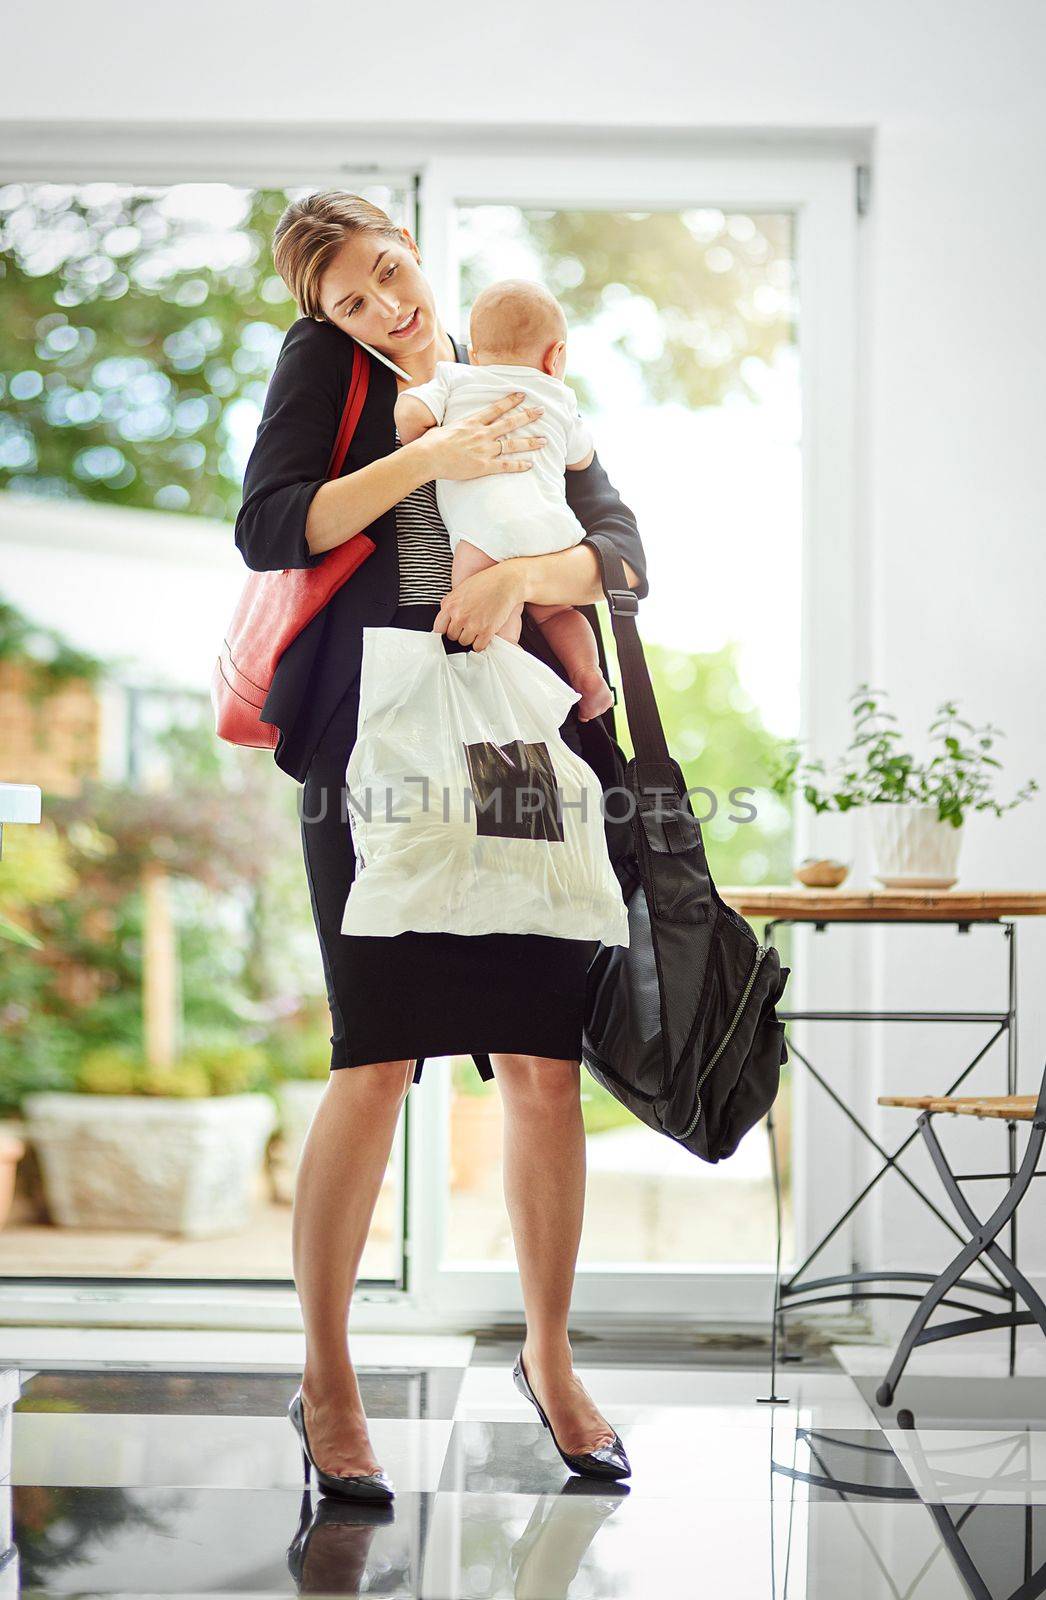 Its hard being a working mom. a busy businesswoman carrying a shopping bag and her baby while talking on the phone on her return from work